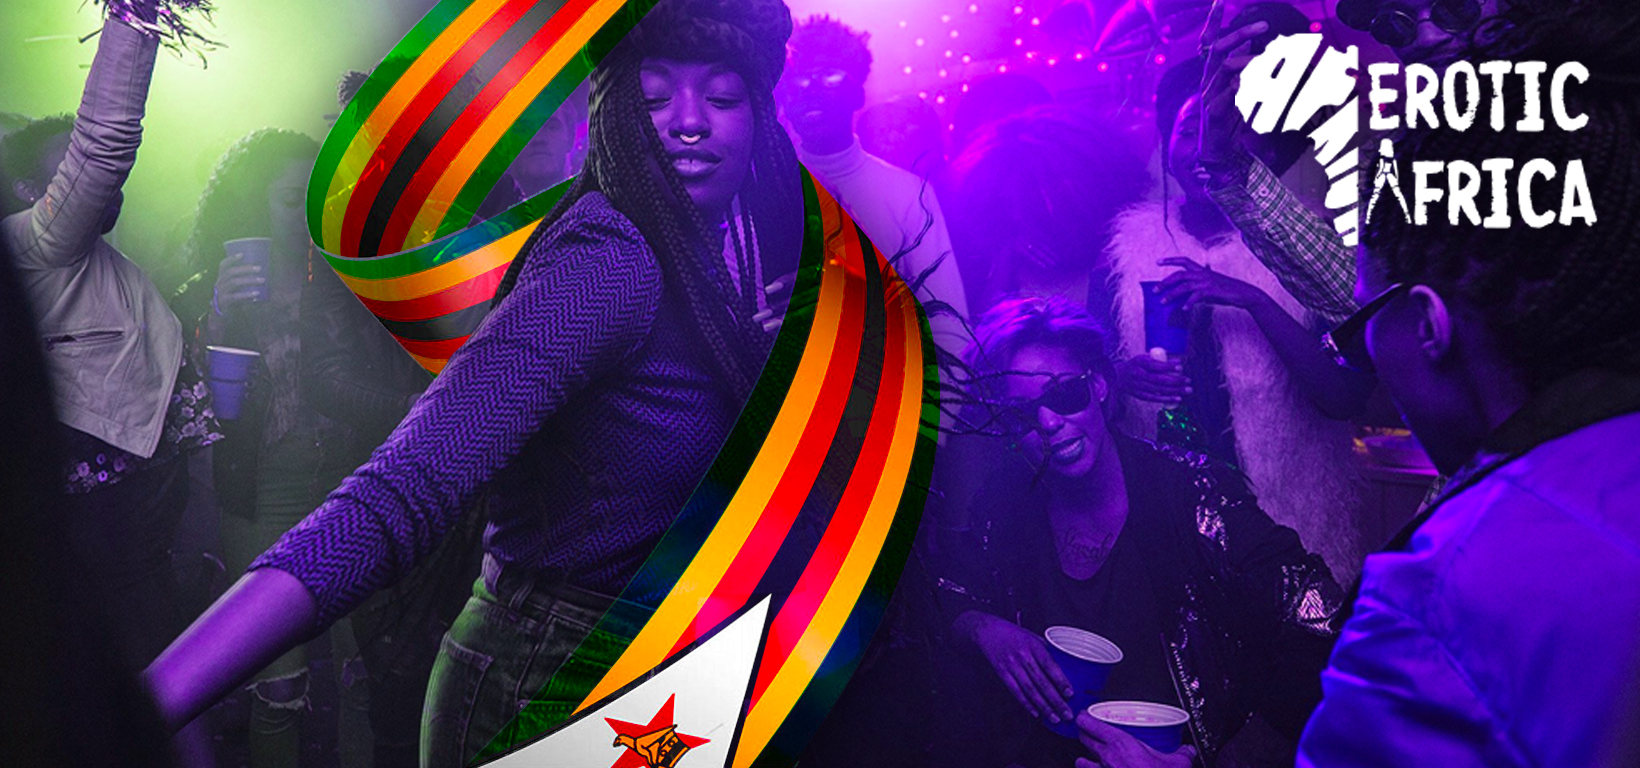 7 top nightlife spots to check out in Zimbabwe